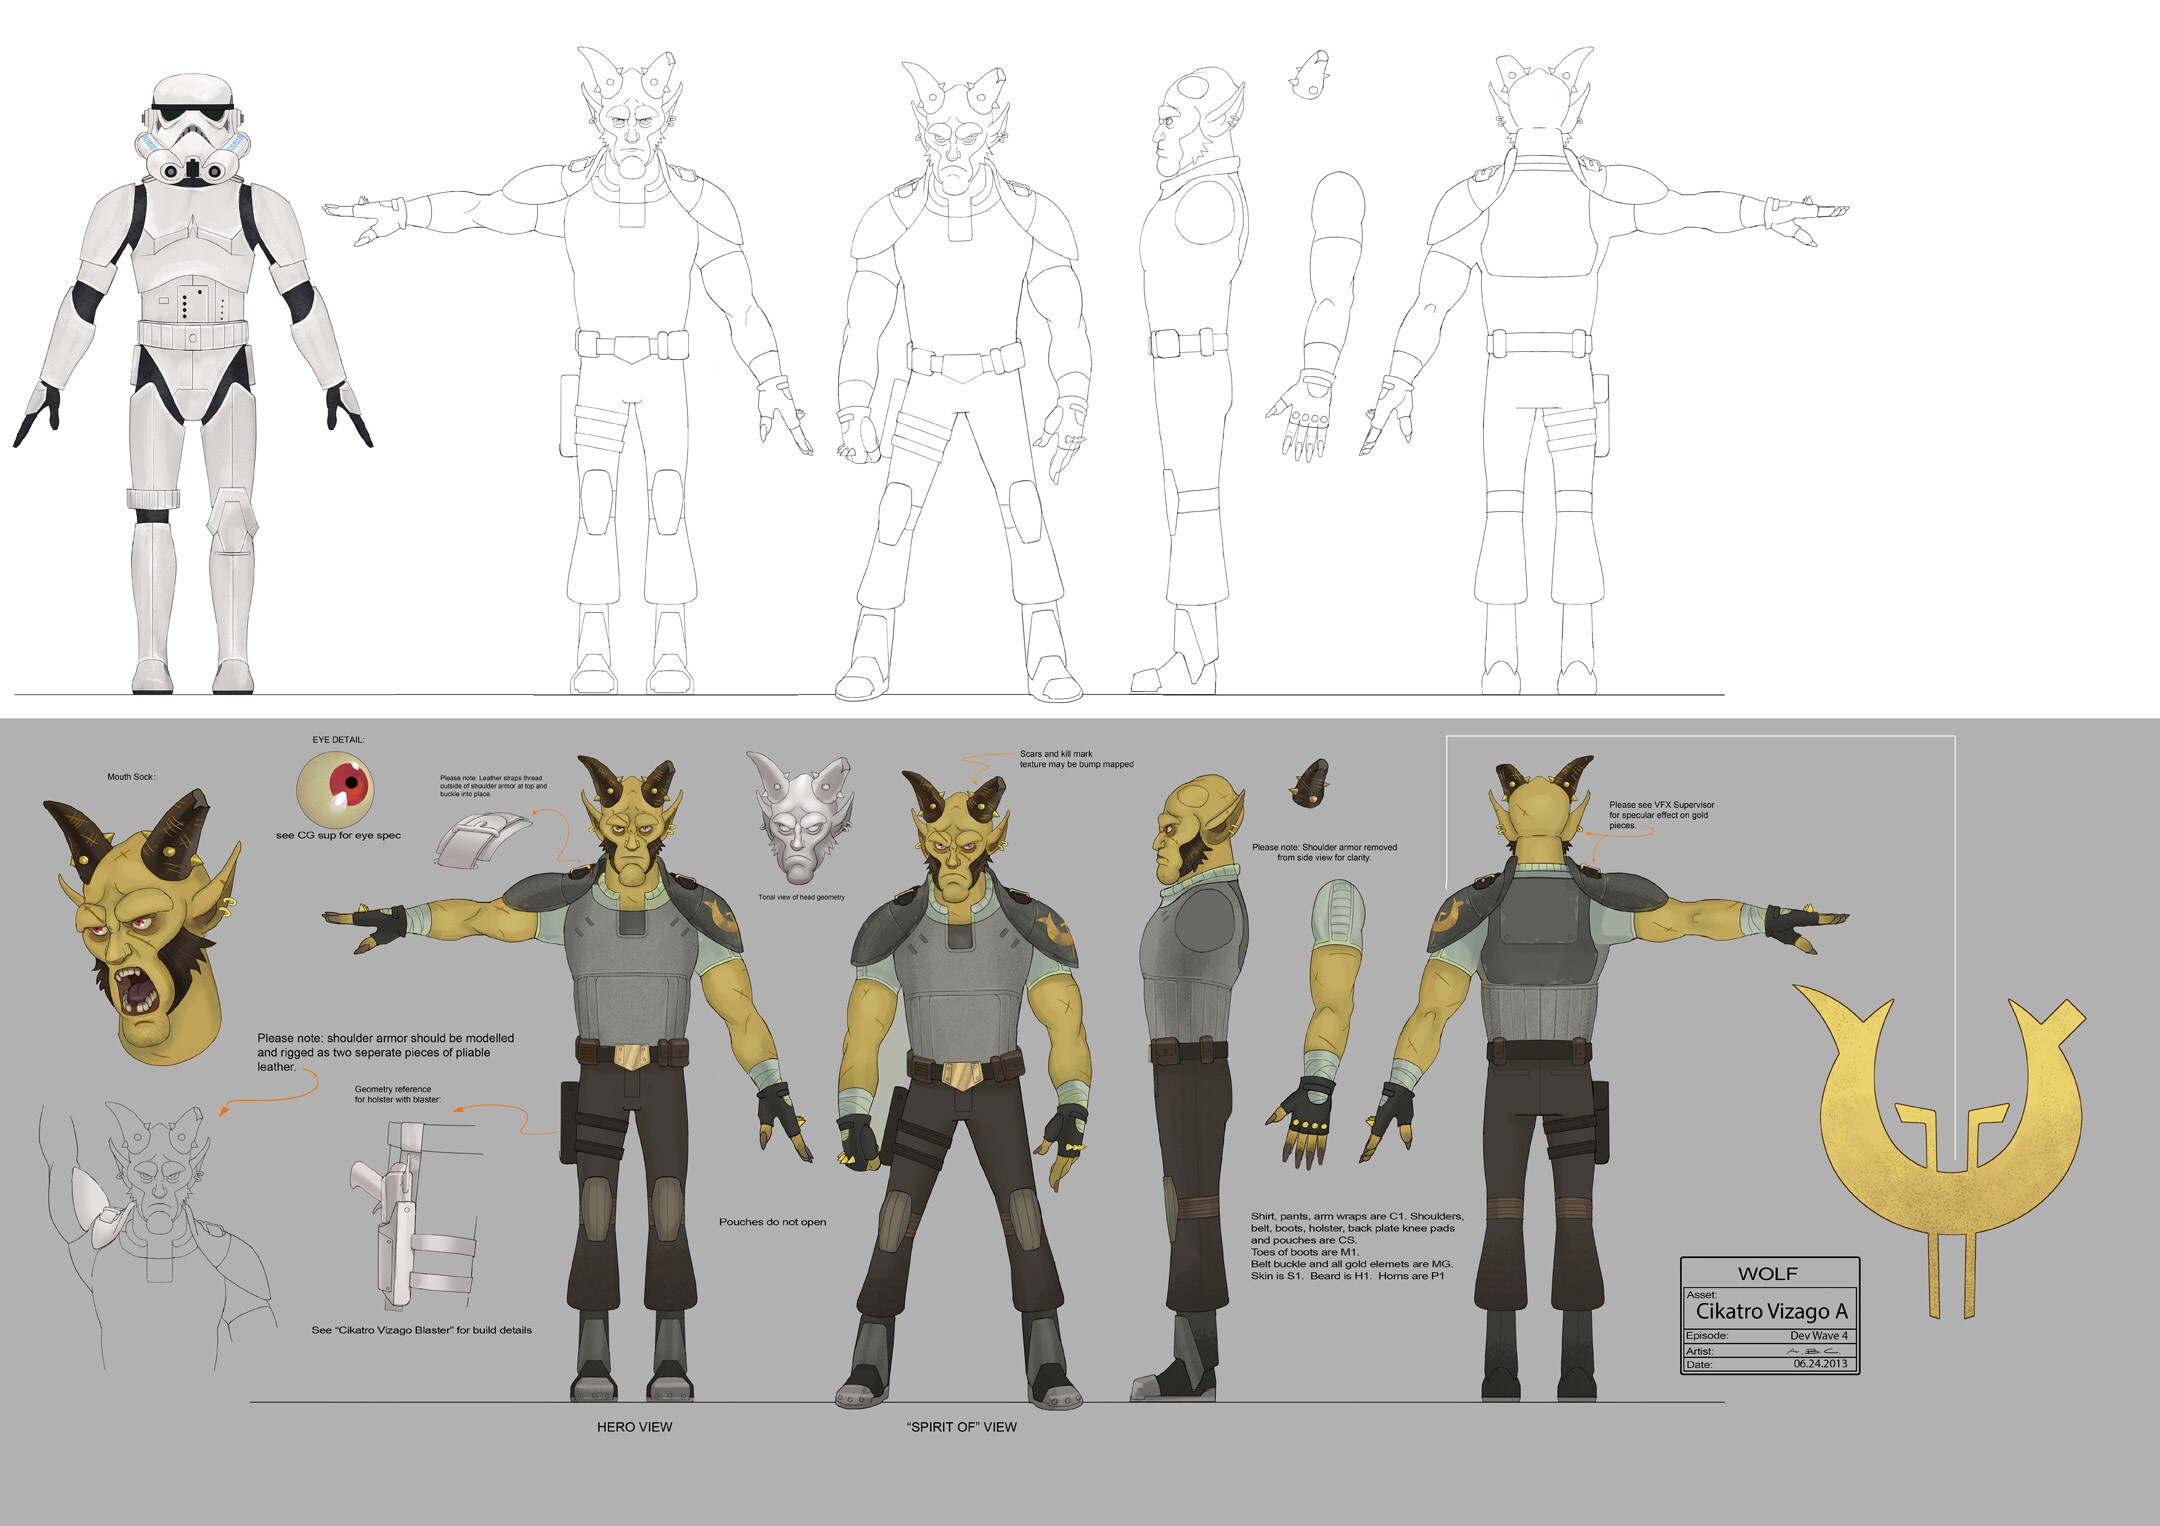 Cikatro Vizago character design illustration, featuring detailed explanations of physical traits ...